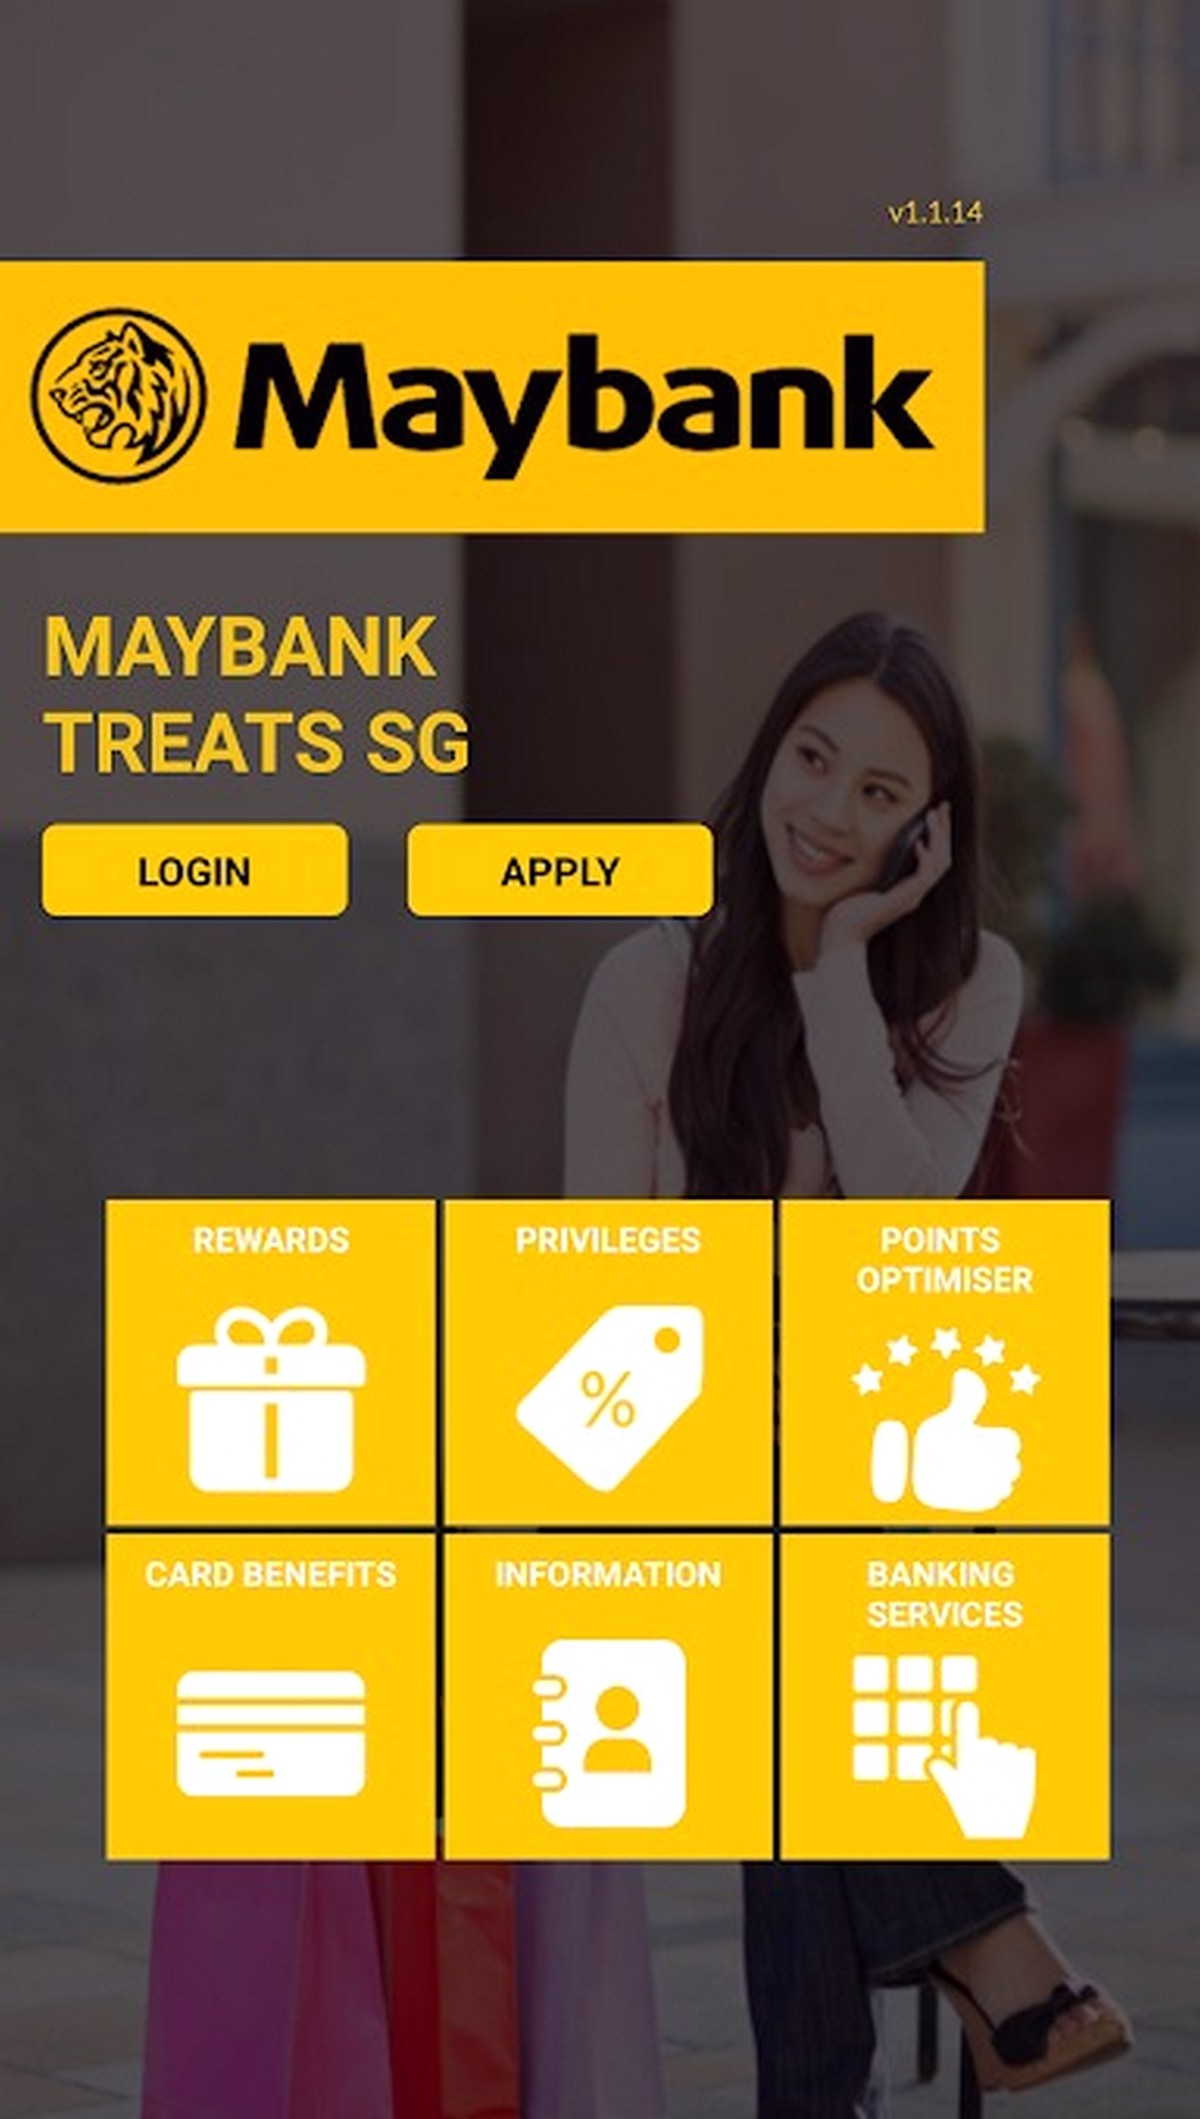 MAYBANK-TREATS-SG-Apps-on-Google-Play-FREE-GONG-CHA-Drinks-Promotion Now till 20 Jun 2021: Get Your FREE Gong Cha Caramel Pearls Milk Tea with Maybank TREATS SG App